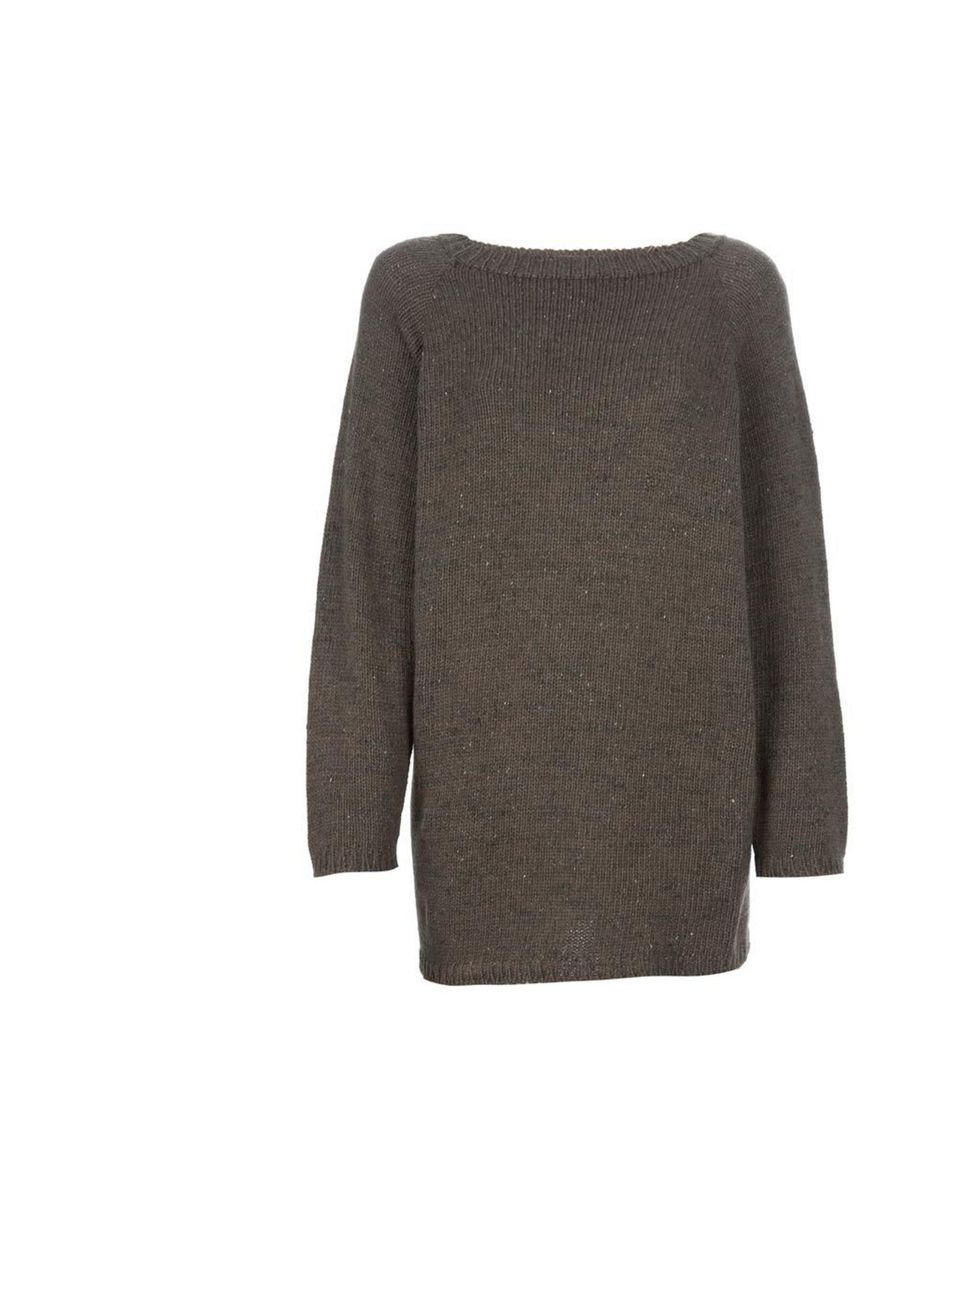 <p>Add a knitted, over-sized jumper, like this one from Stella Jean available for £251 at <a href="http://www.farfetch.com/shopping/women/stella-jean-chunky-knit-sweater-item-10253508.aspx">Farfetch.com </a></p>